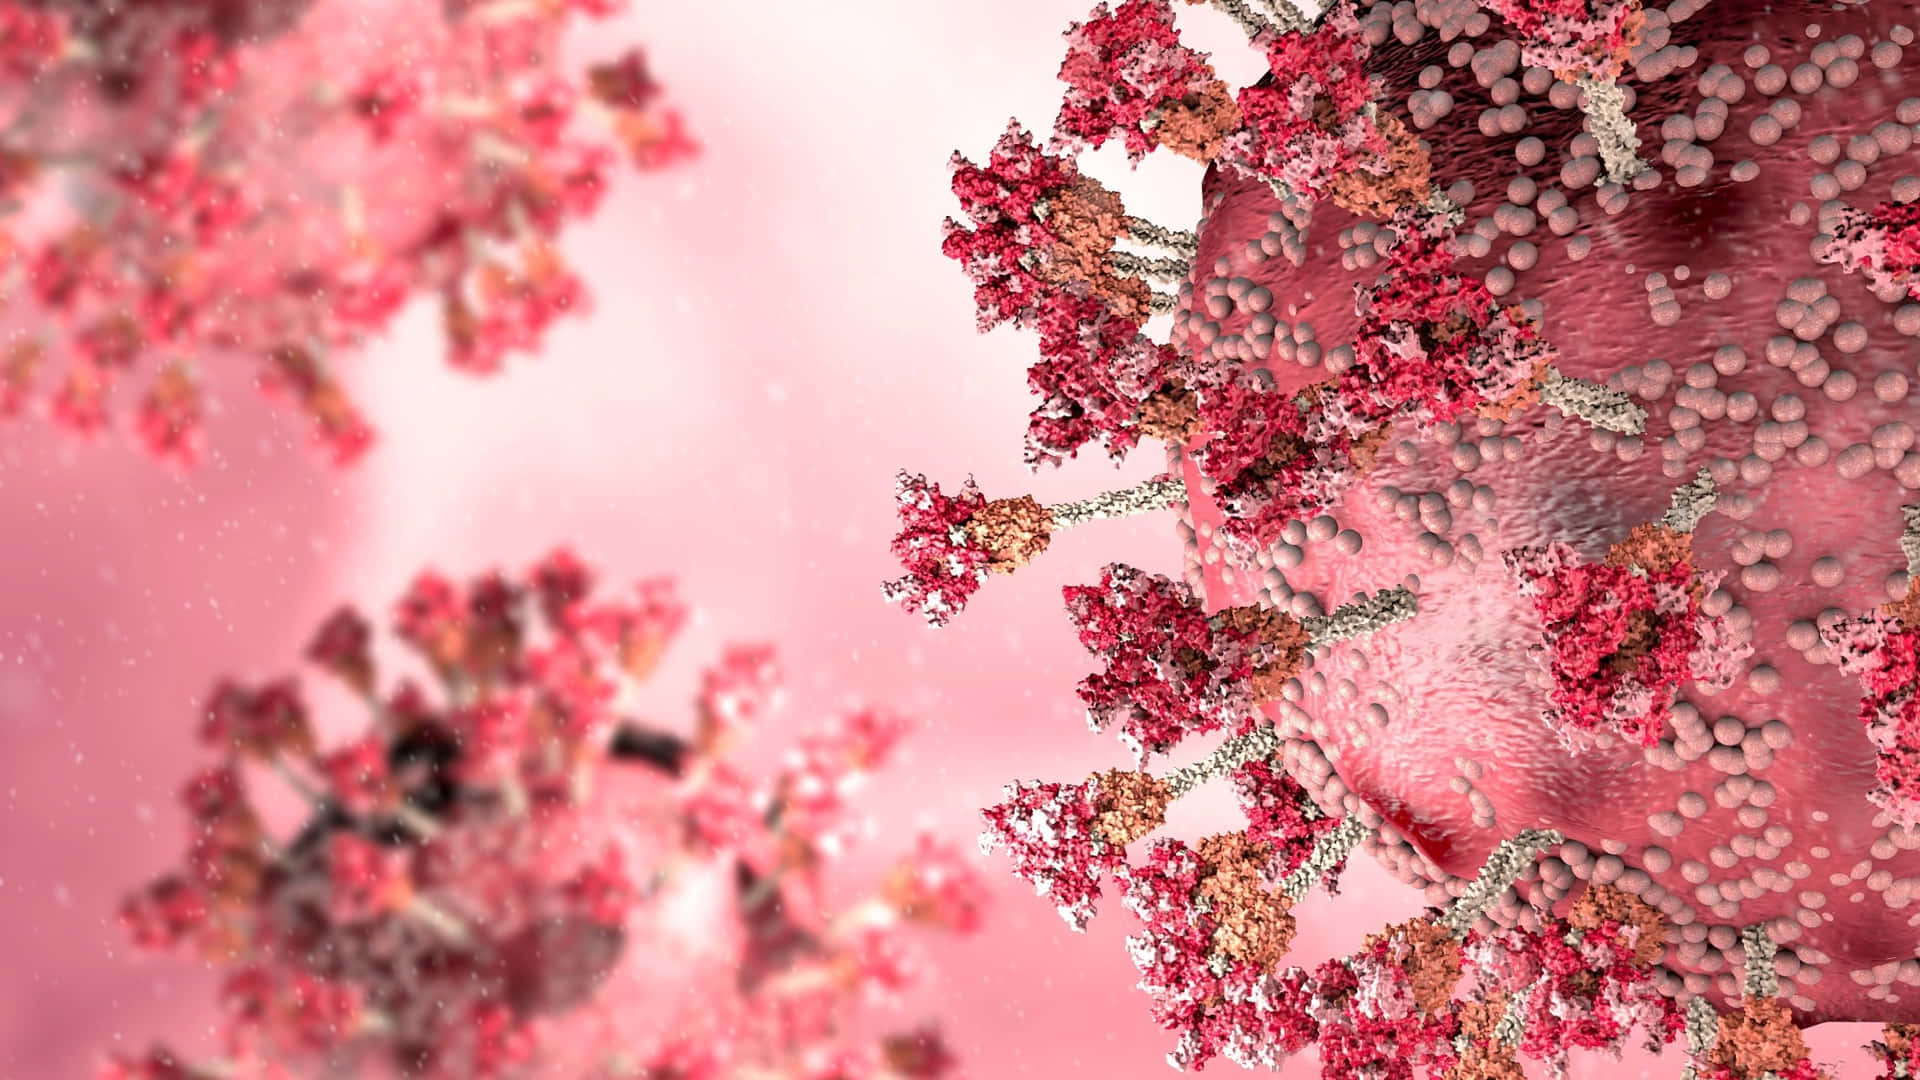 Abstract Pink Crystal Growth Wallpaper